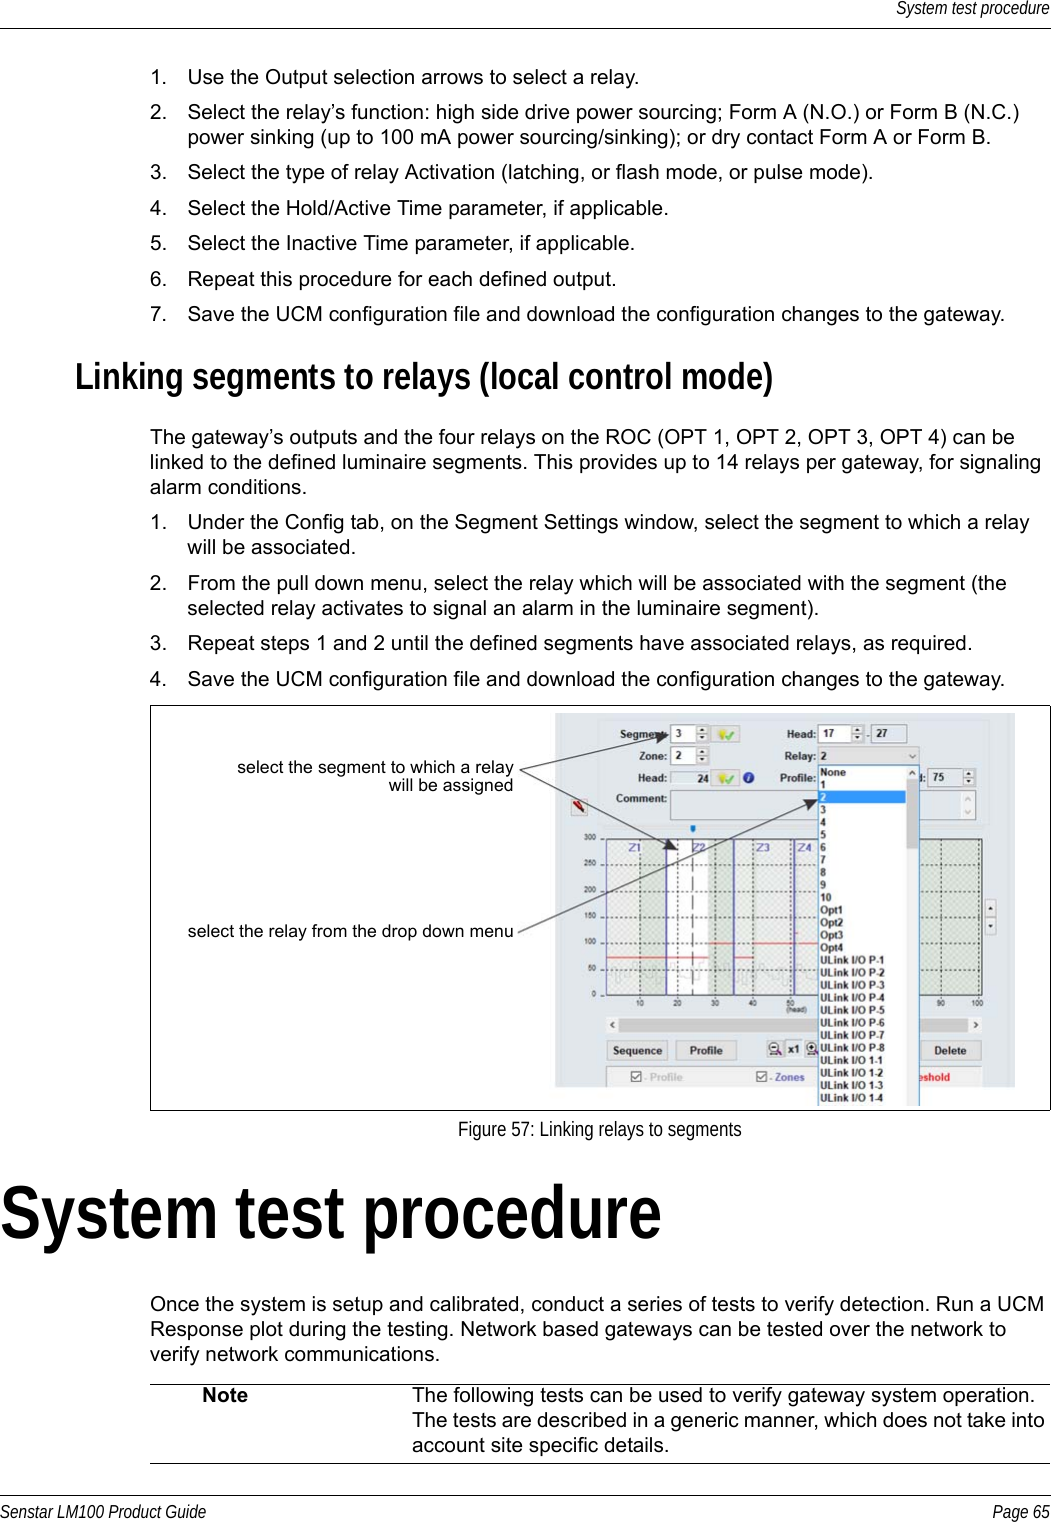 System test procedureSenstar LM100 Product Guide Page 651. Use the Output selection arrows to select a relay.2. Select the relay’s function: high side drive power sourcing; Form A (N.O.) or Form B (N.C.) power sinking (up to 100 mA power sourcing/sinking); or dry contact Form A or Form B.3. Select the type of relay Activation (latching, or flash mode, or pulse mode).4. Select the Hold/Active Time parameter, if applicable.5. Select the Inactive Time parameter, if applicable.6. Repeat this procedure for each defined output.7. Save the UCM configuration file and download the configuration changes to the gateway.Linking segments to relays (local control mode)The gateway’s outputs and the four relays on the ROC (OPT 1, OPT 2, OPT 3, OPT 4) can be linked to the defined luminaire segments. This provides up to 14 relays per gateway, for signaling alarm conditions.1. Under the Config tab, on the Segment Settings window, select the segment to which a relay will be associated.2. From the pull down menu, select the relay which will be associated with the segment (the selected relay activates to signal an alarm in the luminaire segment).3. Repeat steps 1 and 2 until the defined segments have associated relays, as required.4. Save the UCM configuration file and download the configuration changes to the gateway.System test procedureOnce the system is setup and calibrated, conduct a series of tests to verify detection. Run a UCM Response plot during the testing. Network based gateways can be tested over the network to verify network communications.Figure 57: Linking relays to segmentsNote The following tests can be used to verify gateway system operation. The tests are described in a generic manner, which does not take into account site specific details.select the segment to which a relaywill be assignedselect the relay from the drop down menu